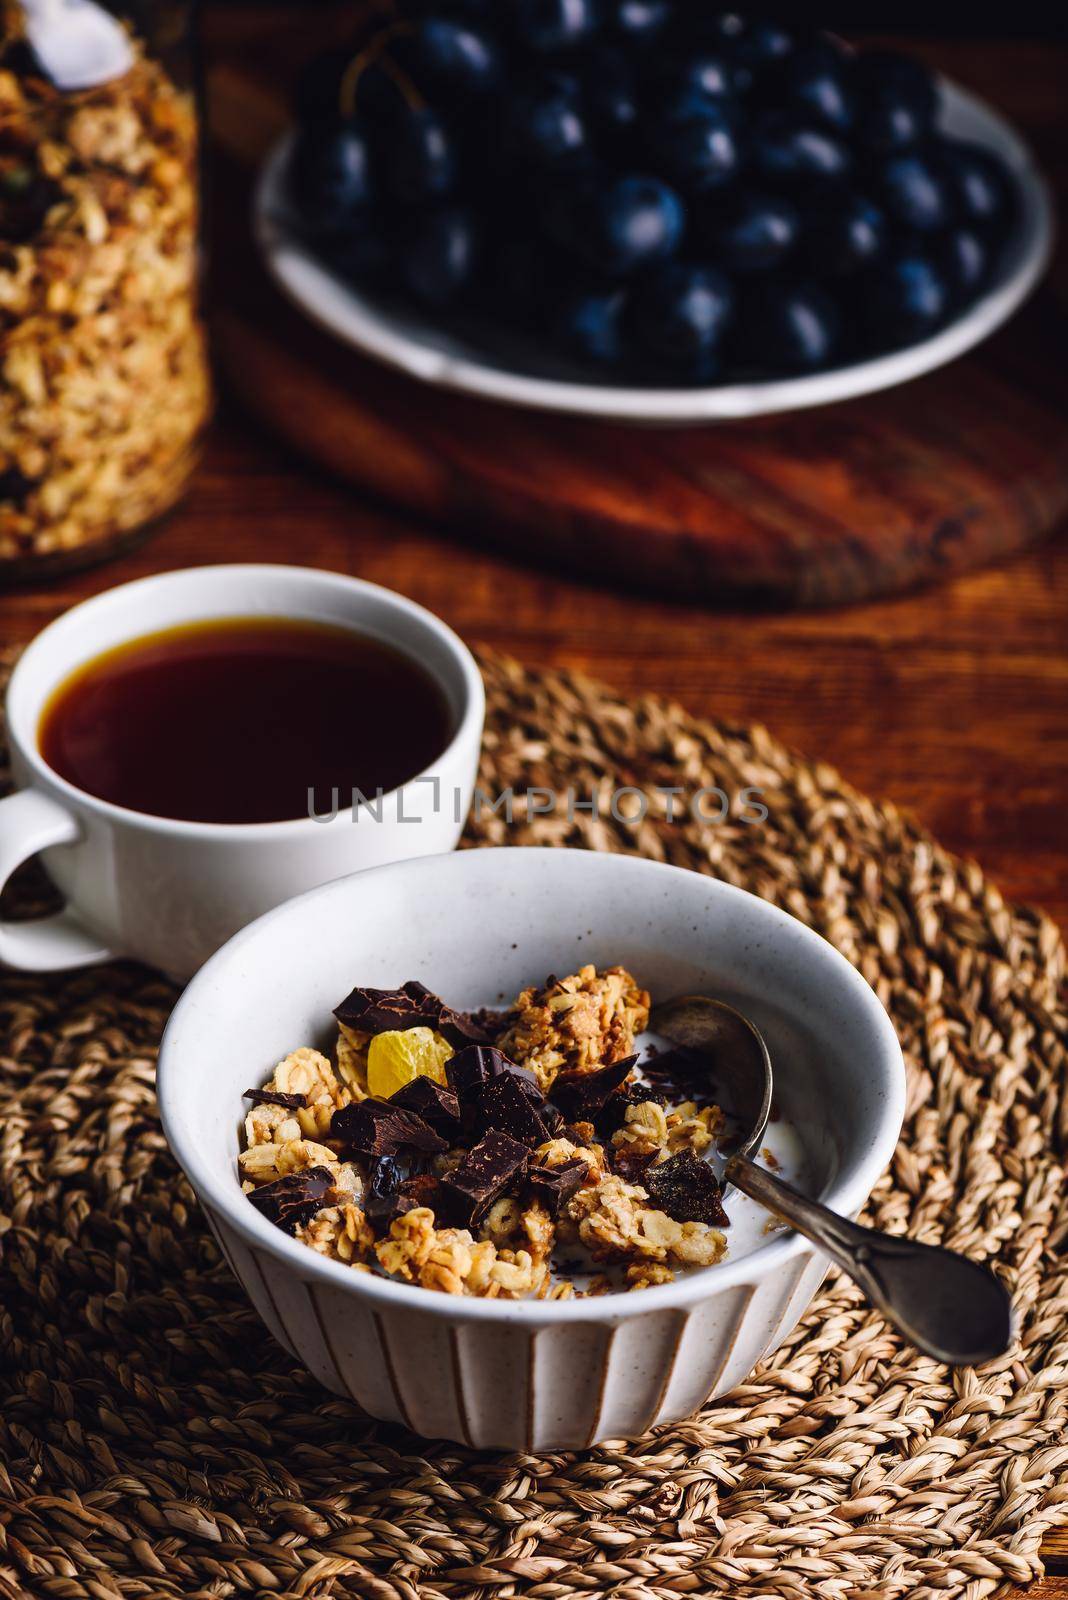 Bowl with Granola, Dried Fruits and Chocolate by Seva_blsv